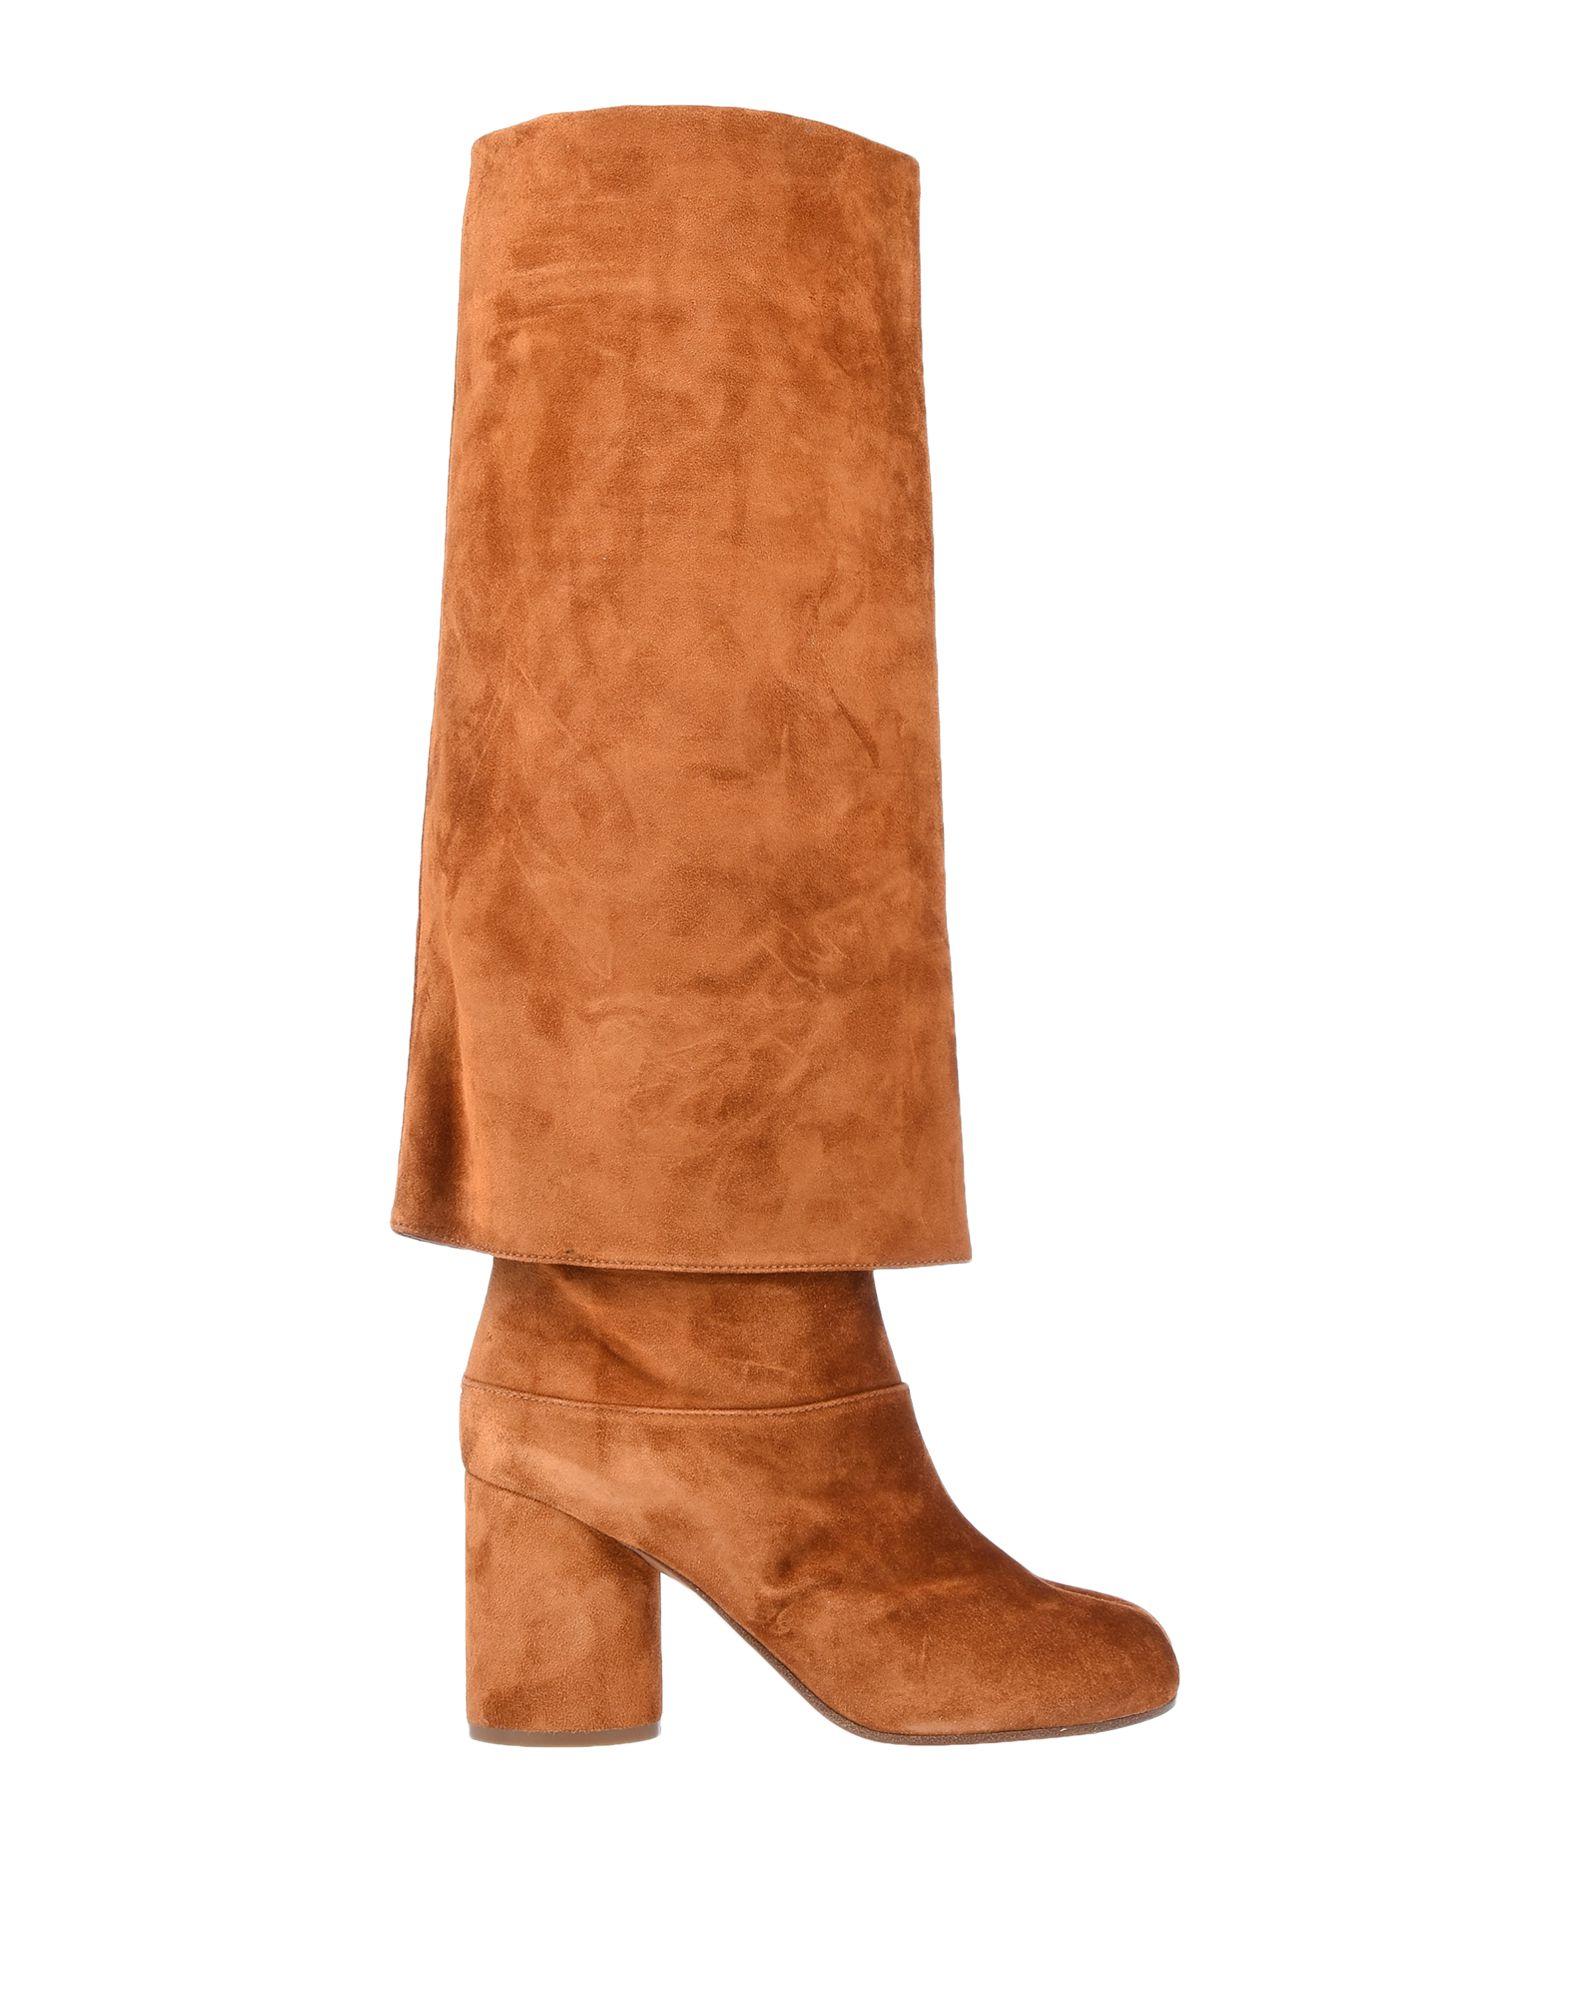 Maison Margiela Leather Boots in Camel (Brown) - Lyst